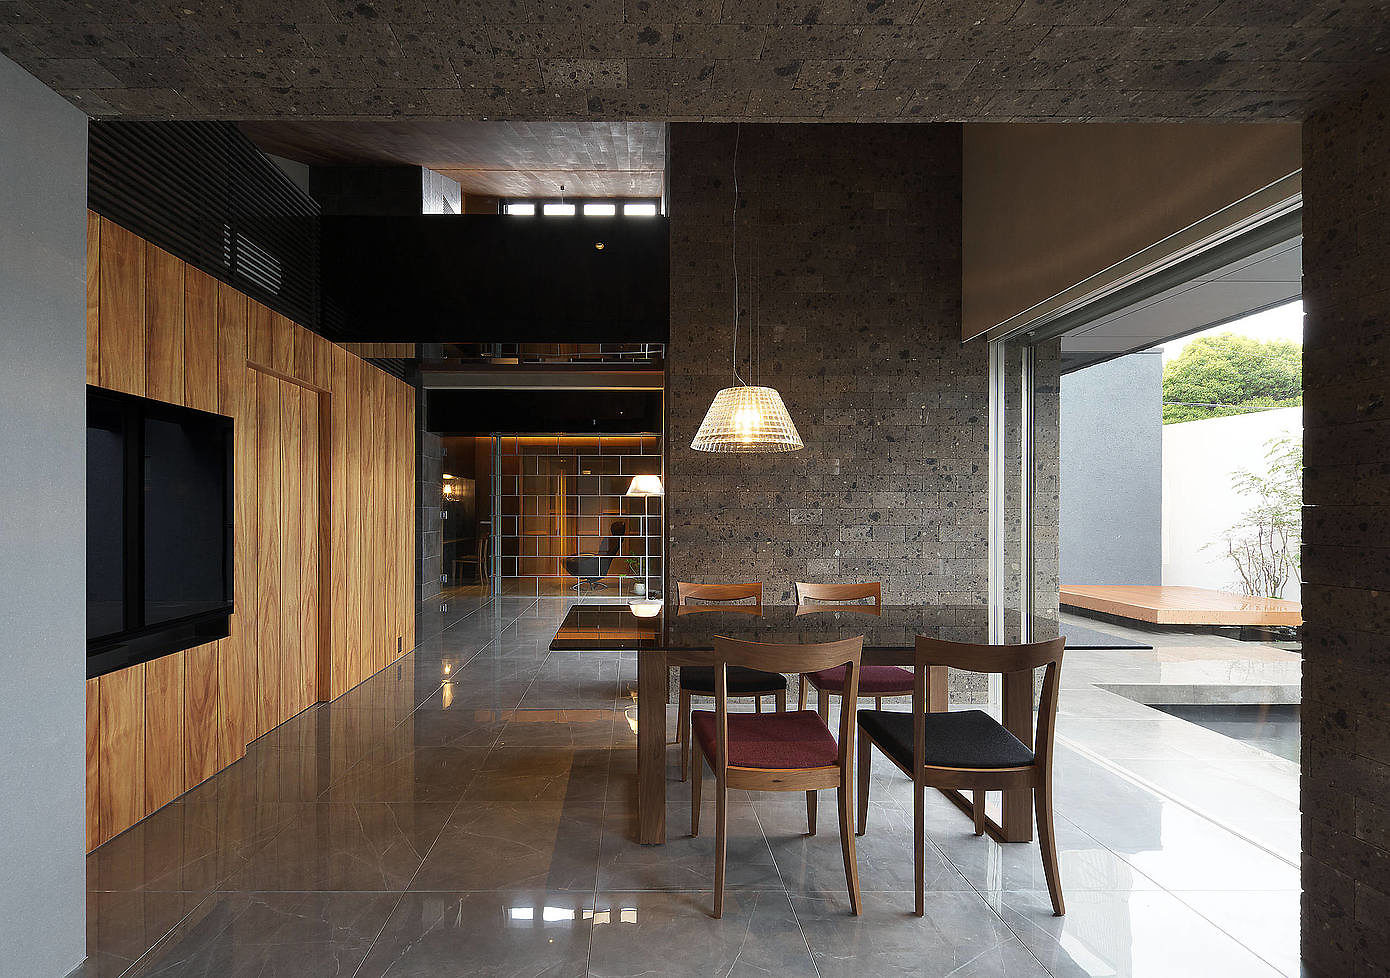 House in Japan by Hiraoka Architects